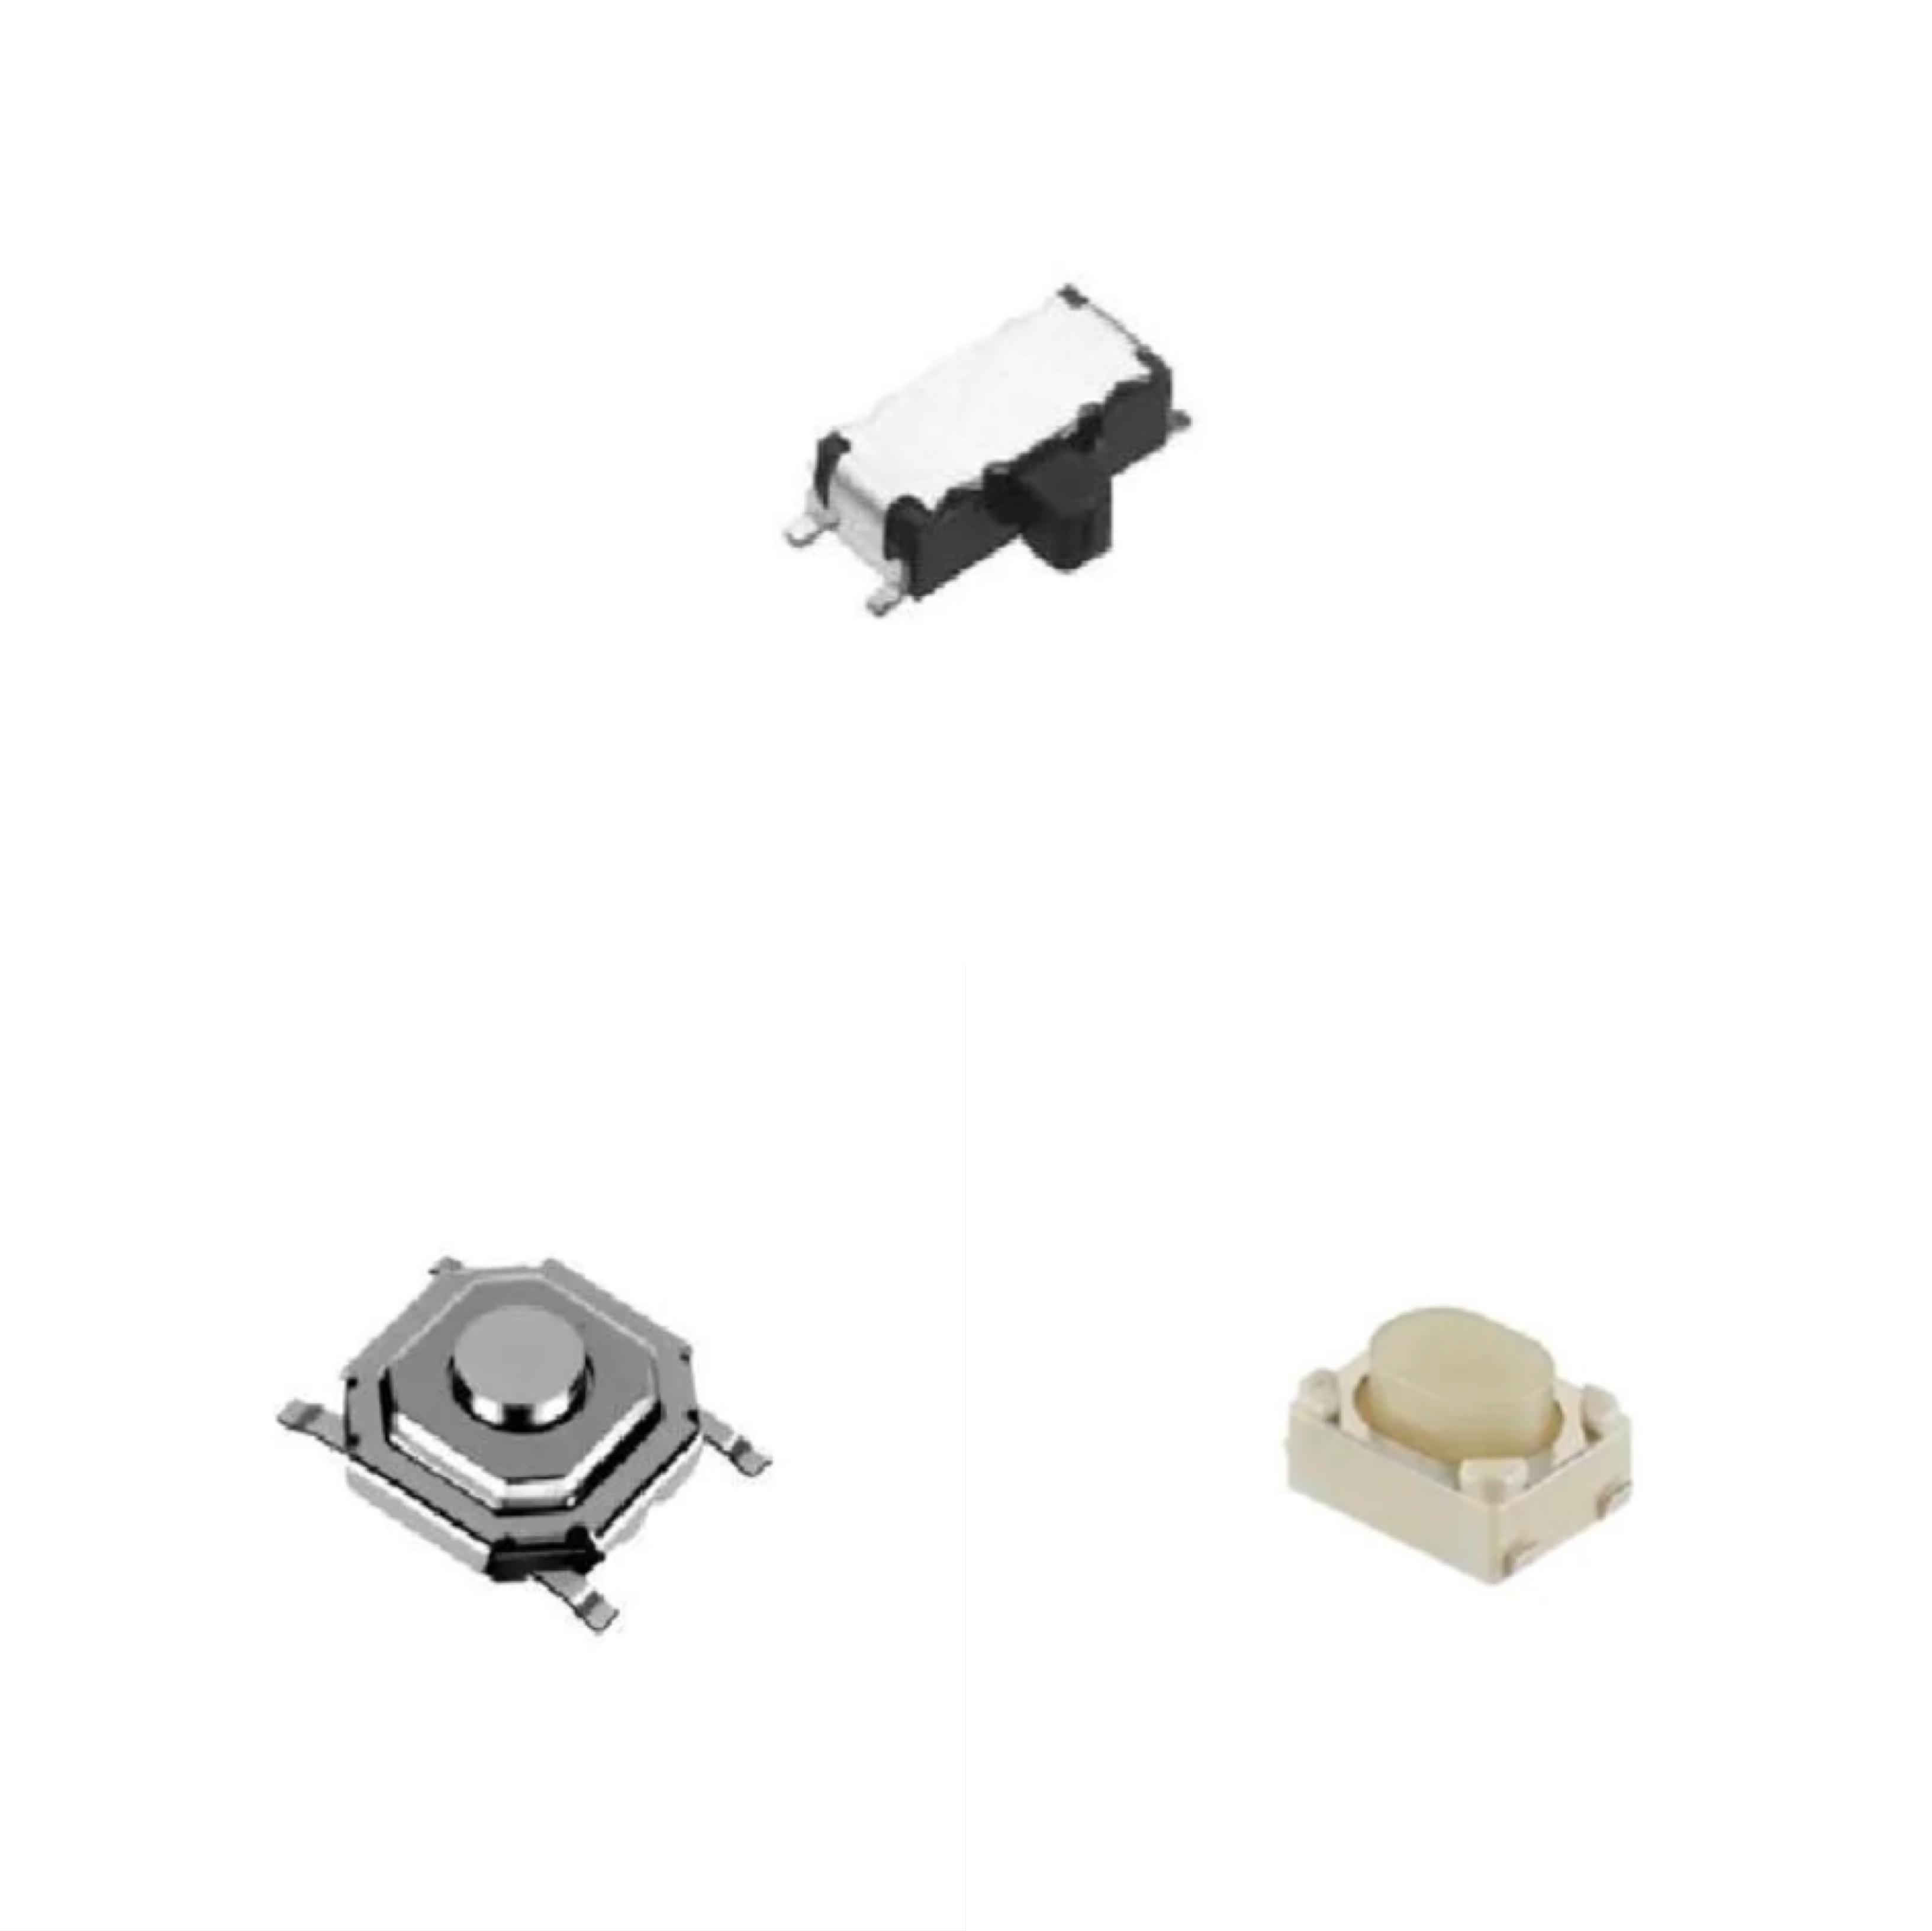 Best quality Development Boards - SKRTLAE010 4.50mm x 3.40mm SPST 50mA 12VDC Side operation Round Button SMD Tactile Switches RoHS – Ronghua